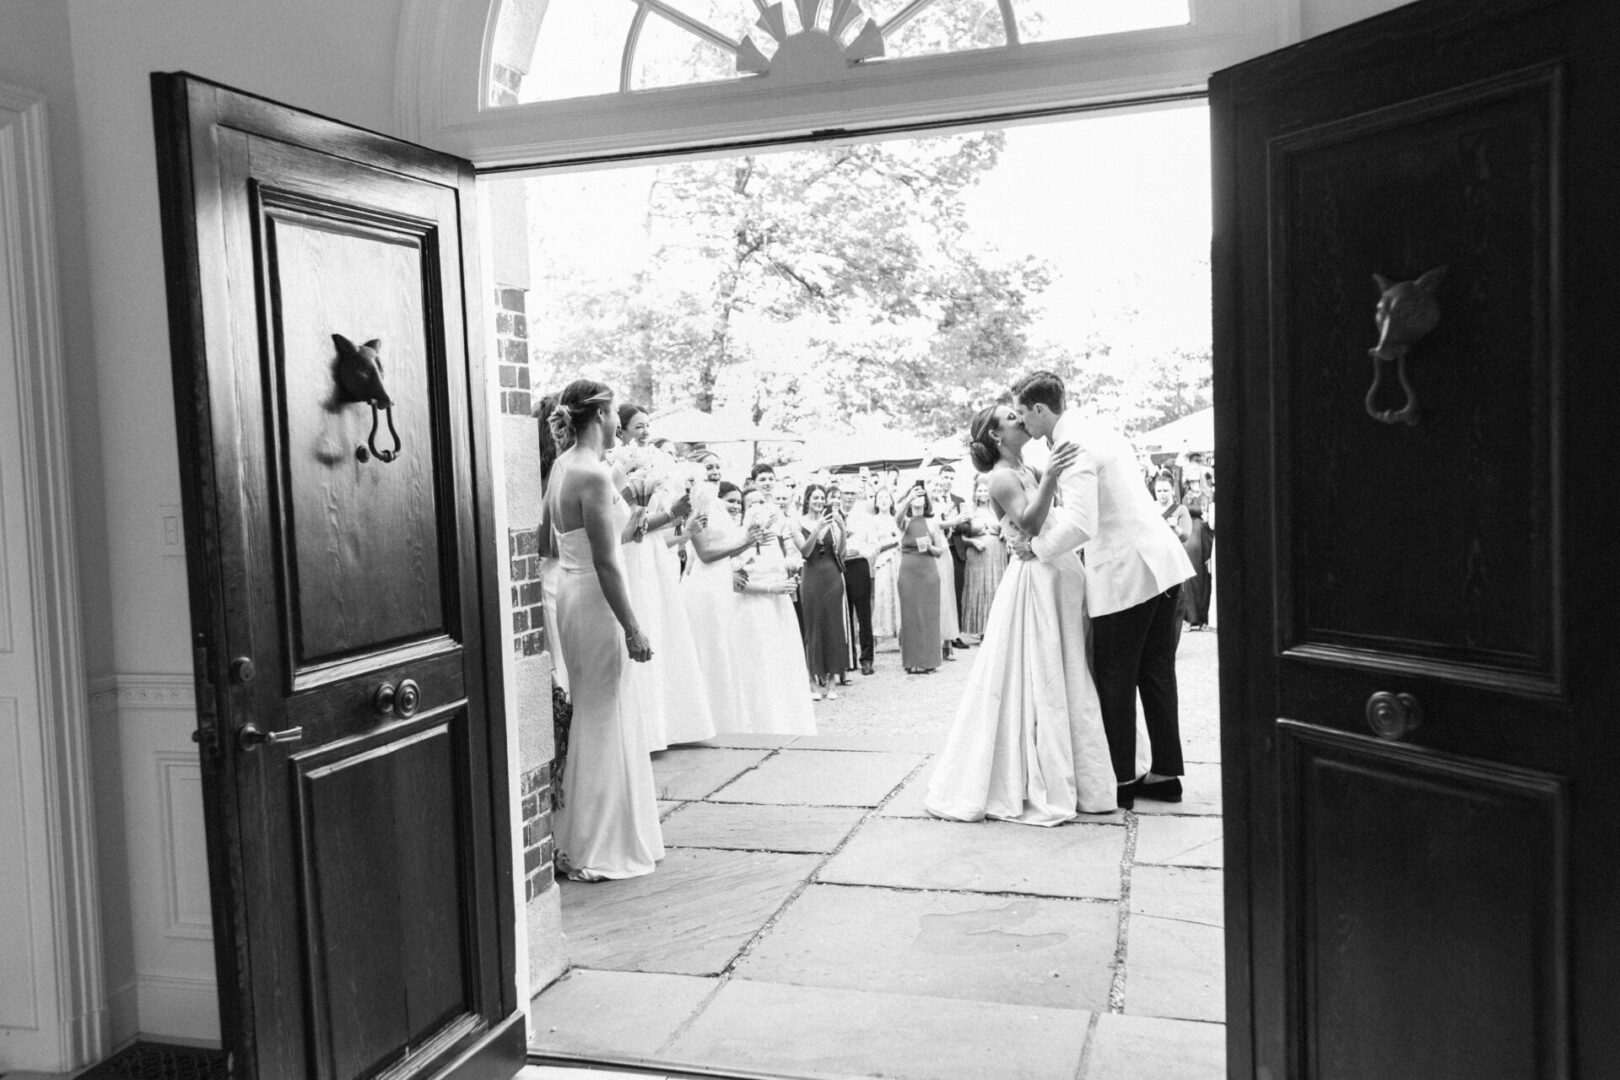 The bride and the groom kissing at the entrance of church